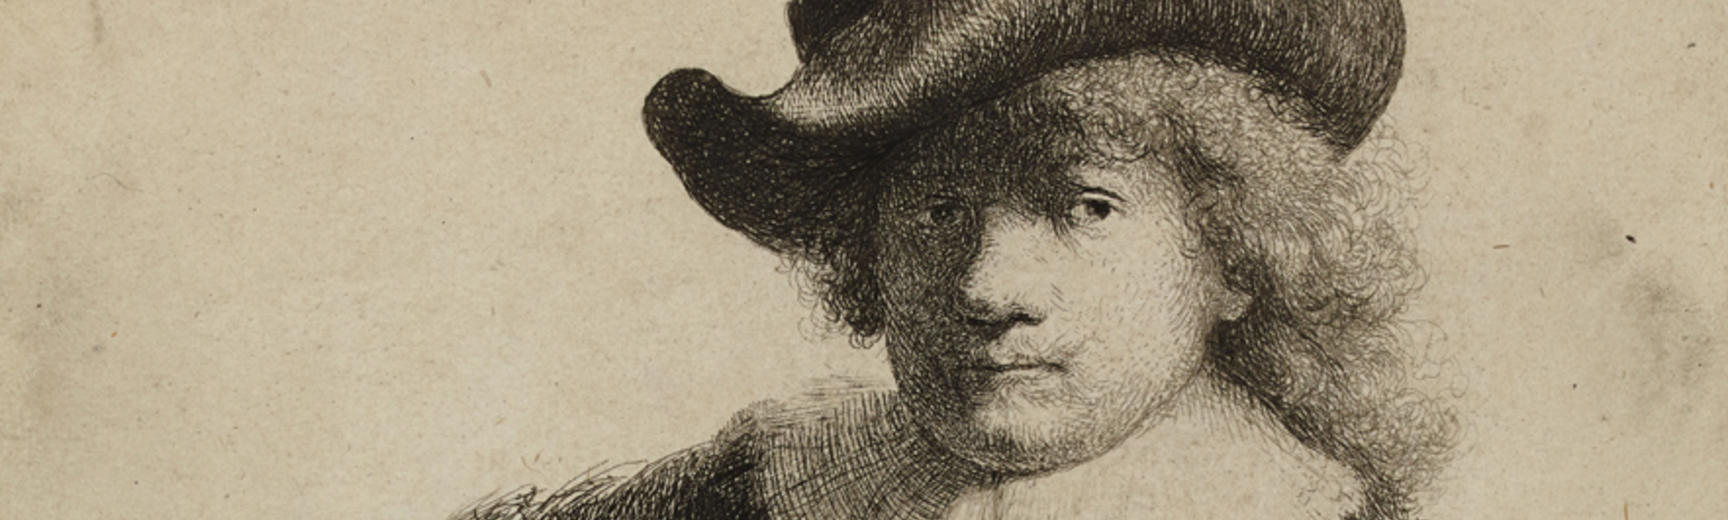 2020 Young Rembrandt Exhibition – Rembrandt, Self-portrait in a soft hat and a patterned cloak, 1631 © British Museum, London